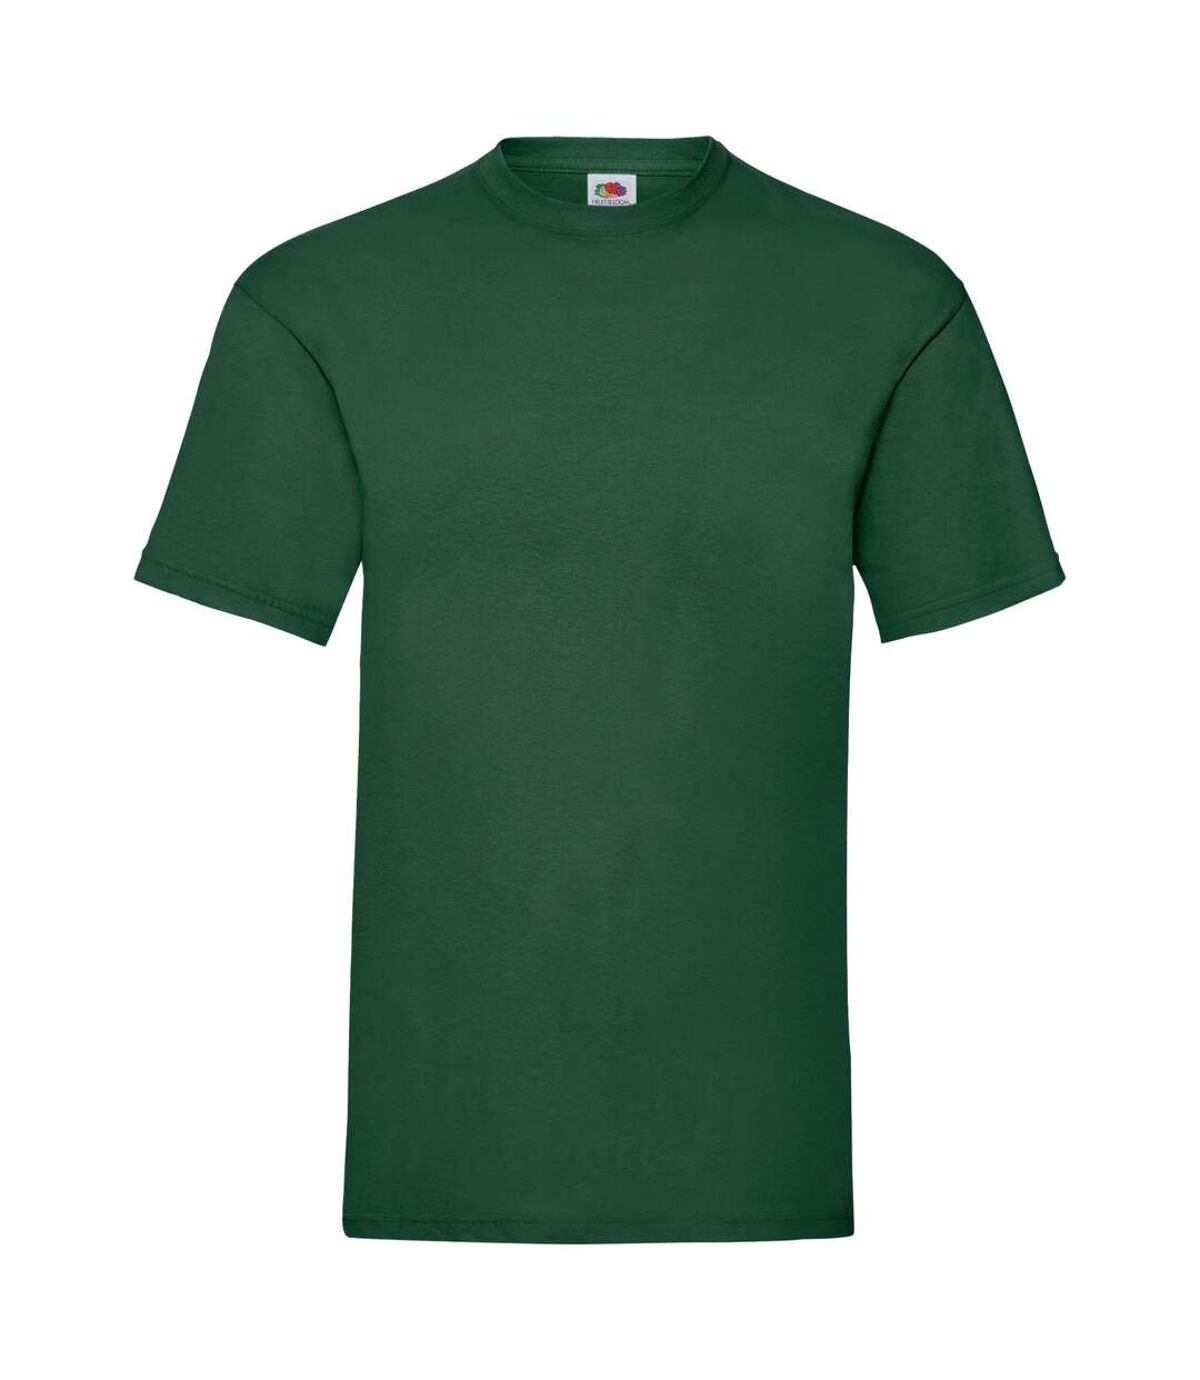 Fruit Of The Loom - T-shirt manches courtes - Homme (Vert bouteille) - UTBC330